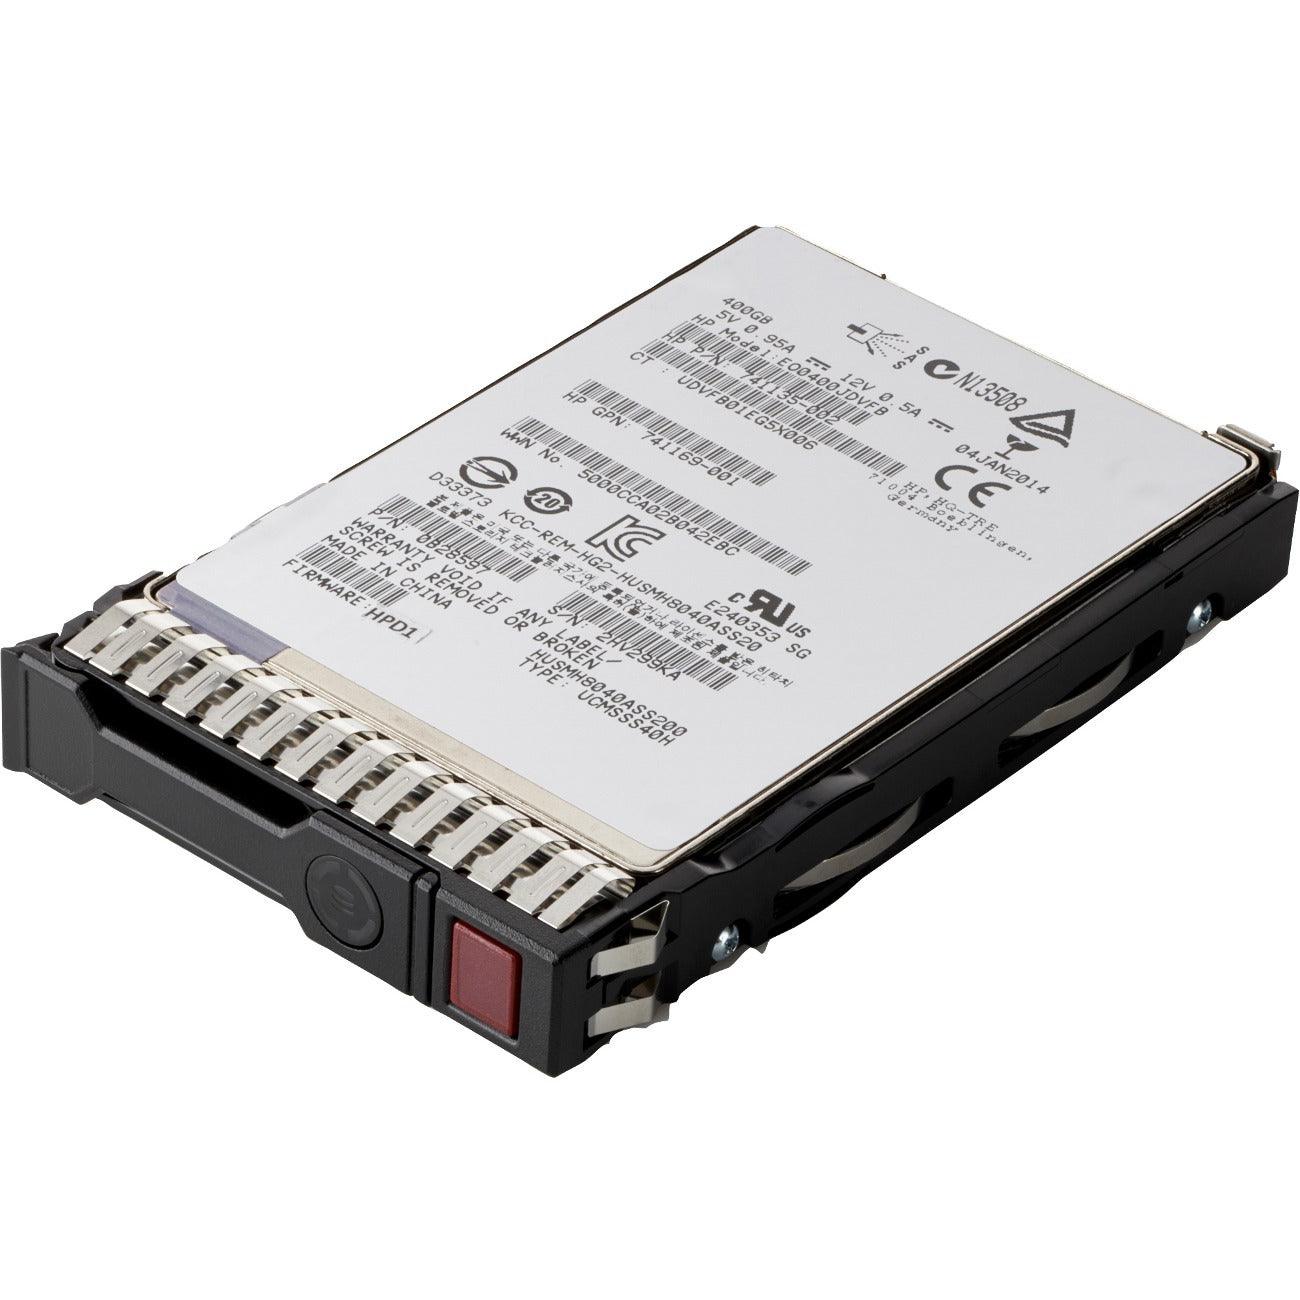 HPE 480GB SATA 6G Mixed Use SFF (2.5in) SC SSD P07922-B21